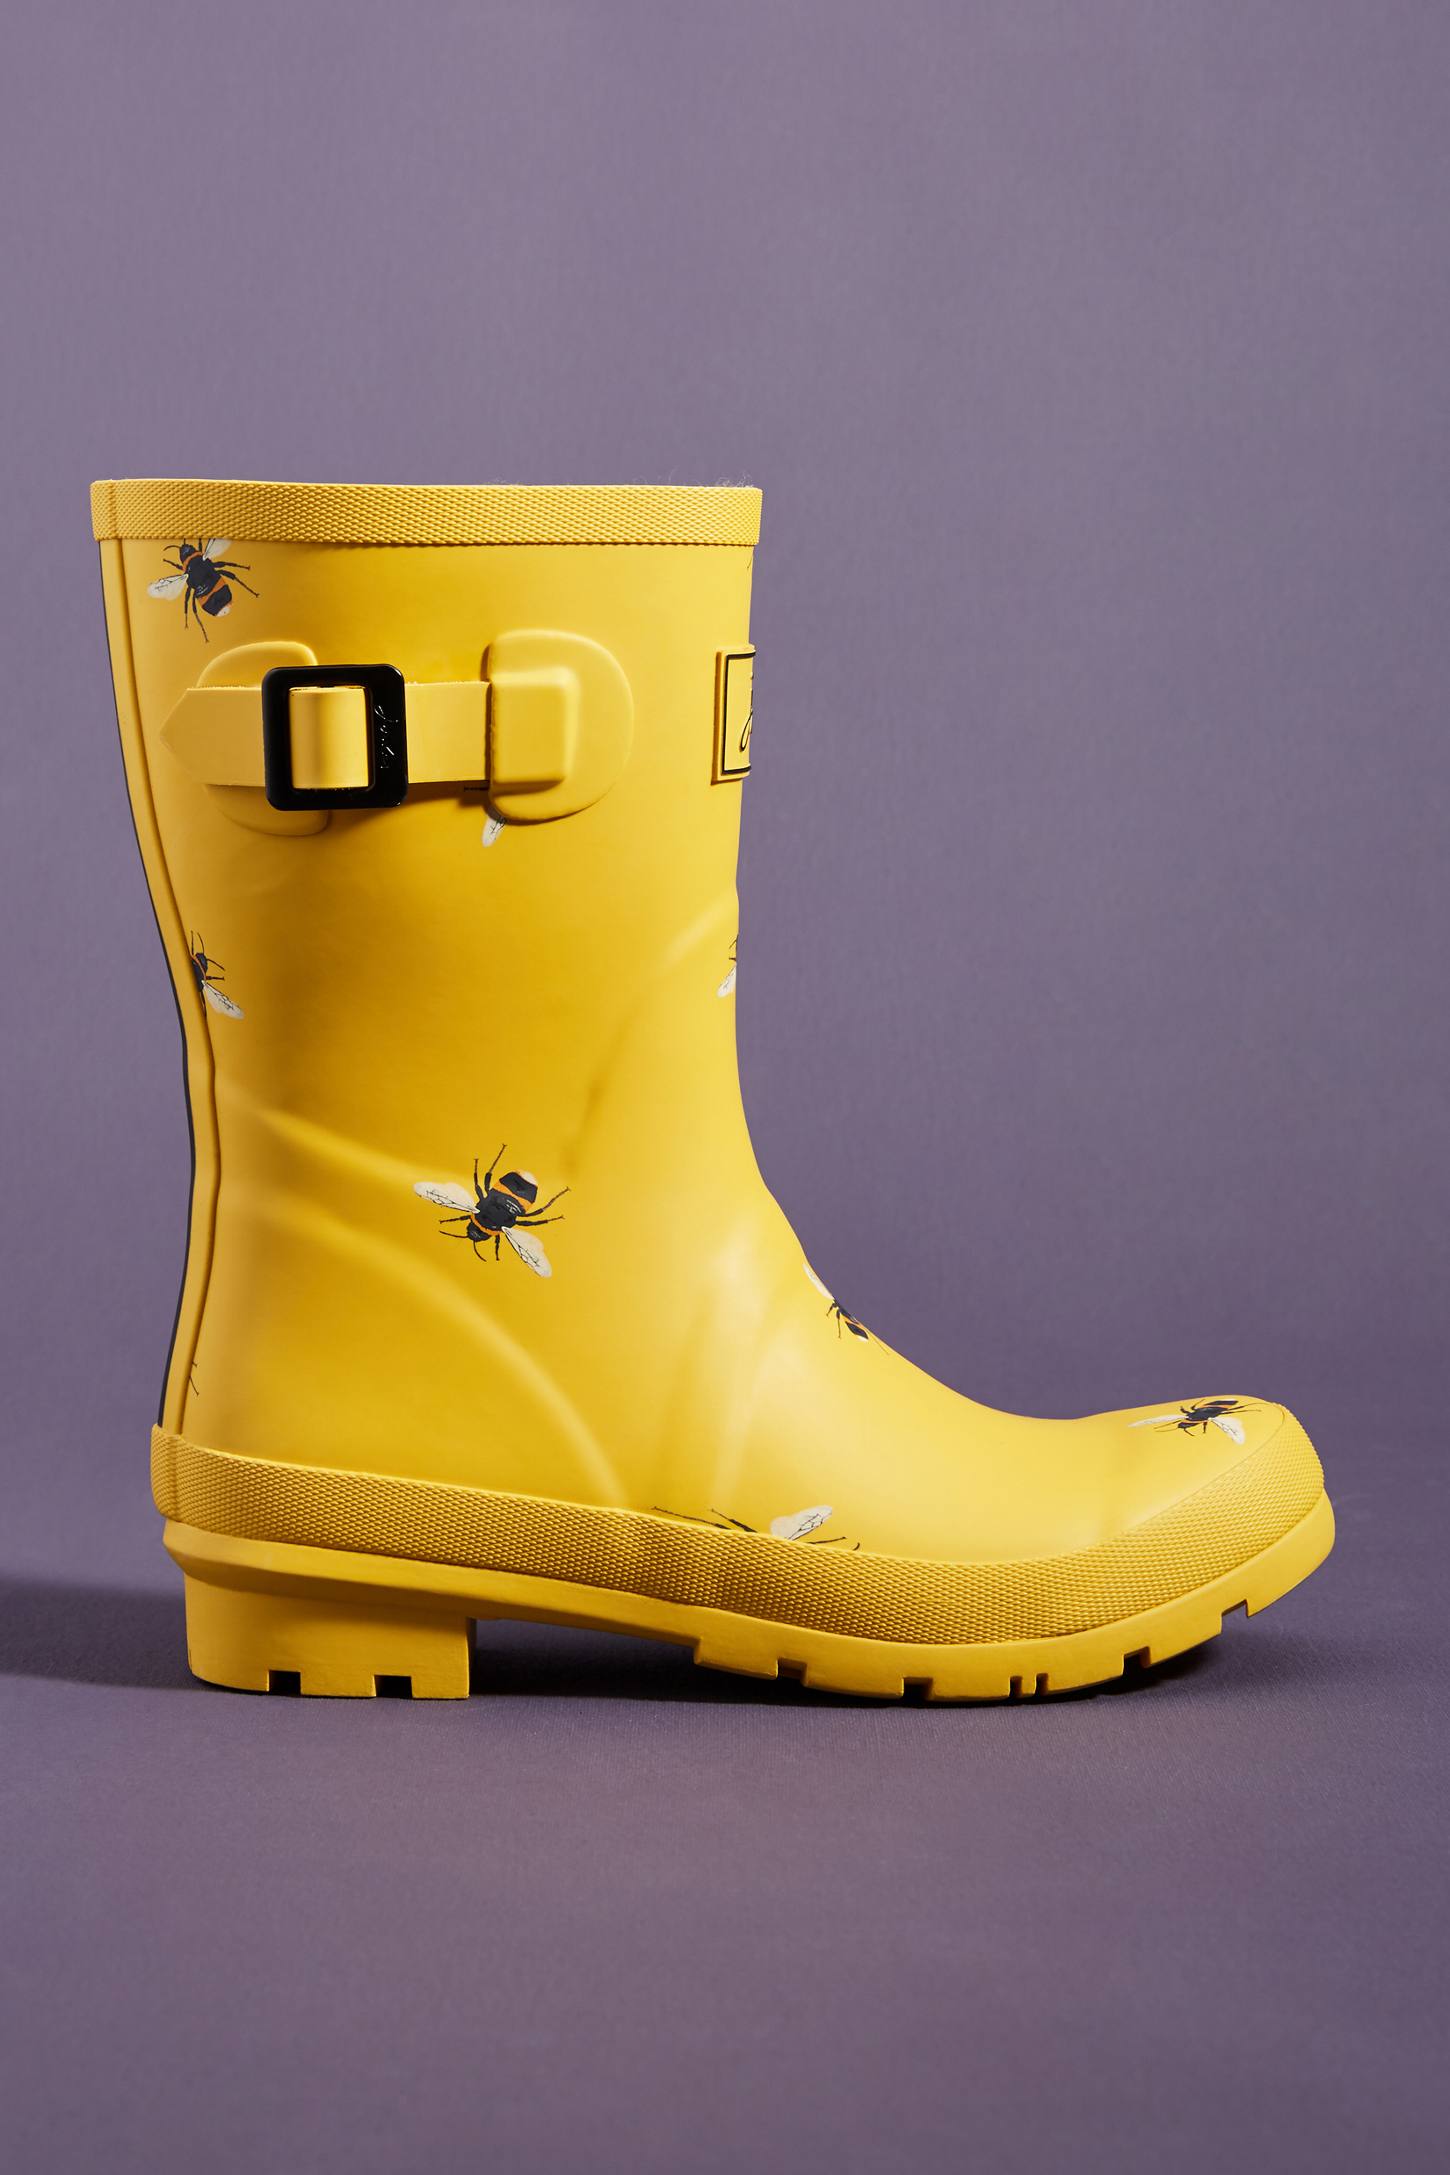 yellow rain boots with bees